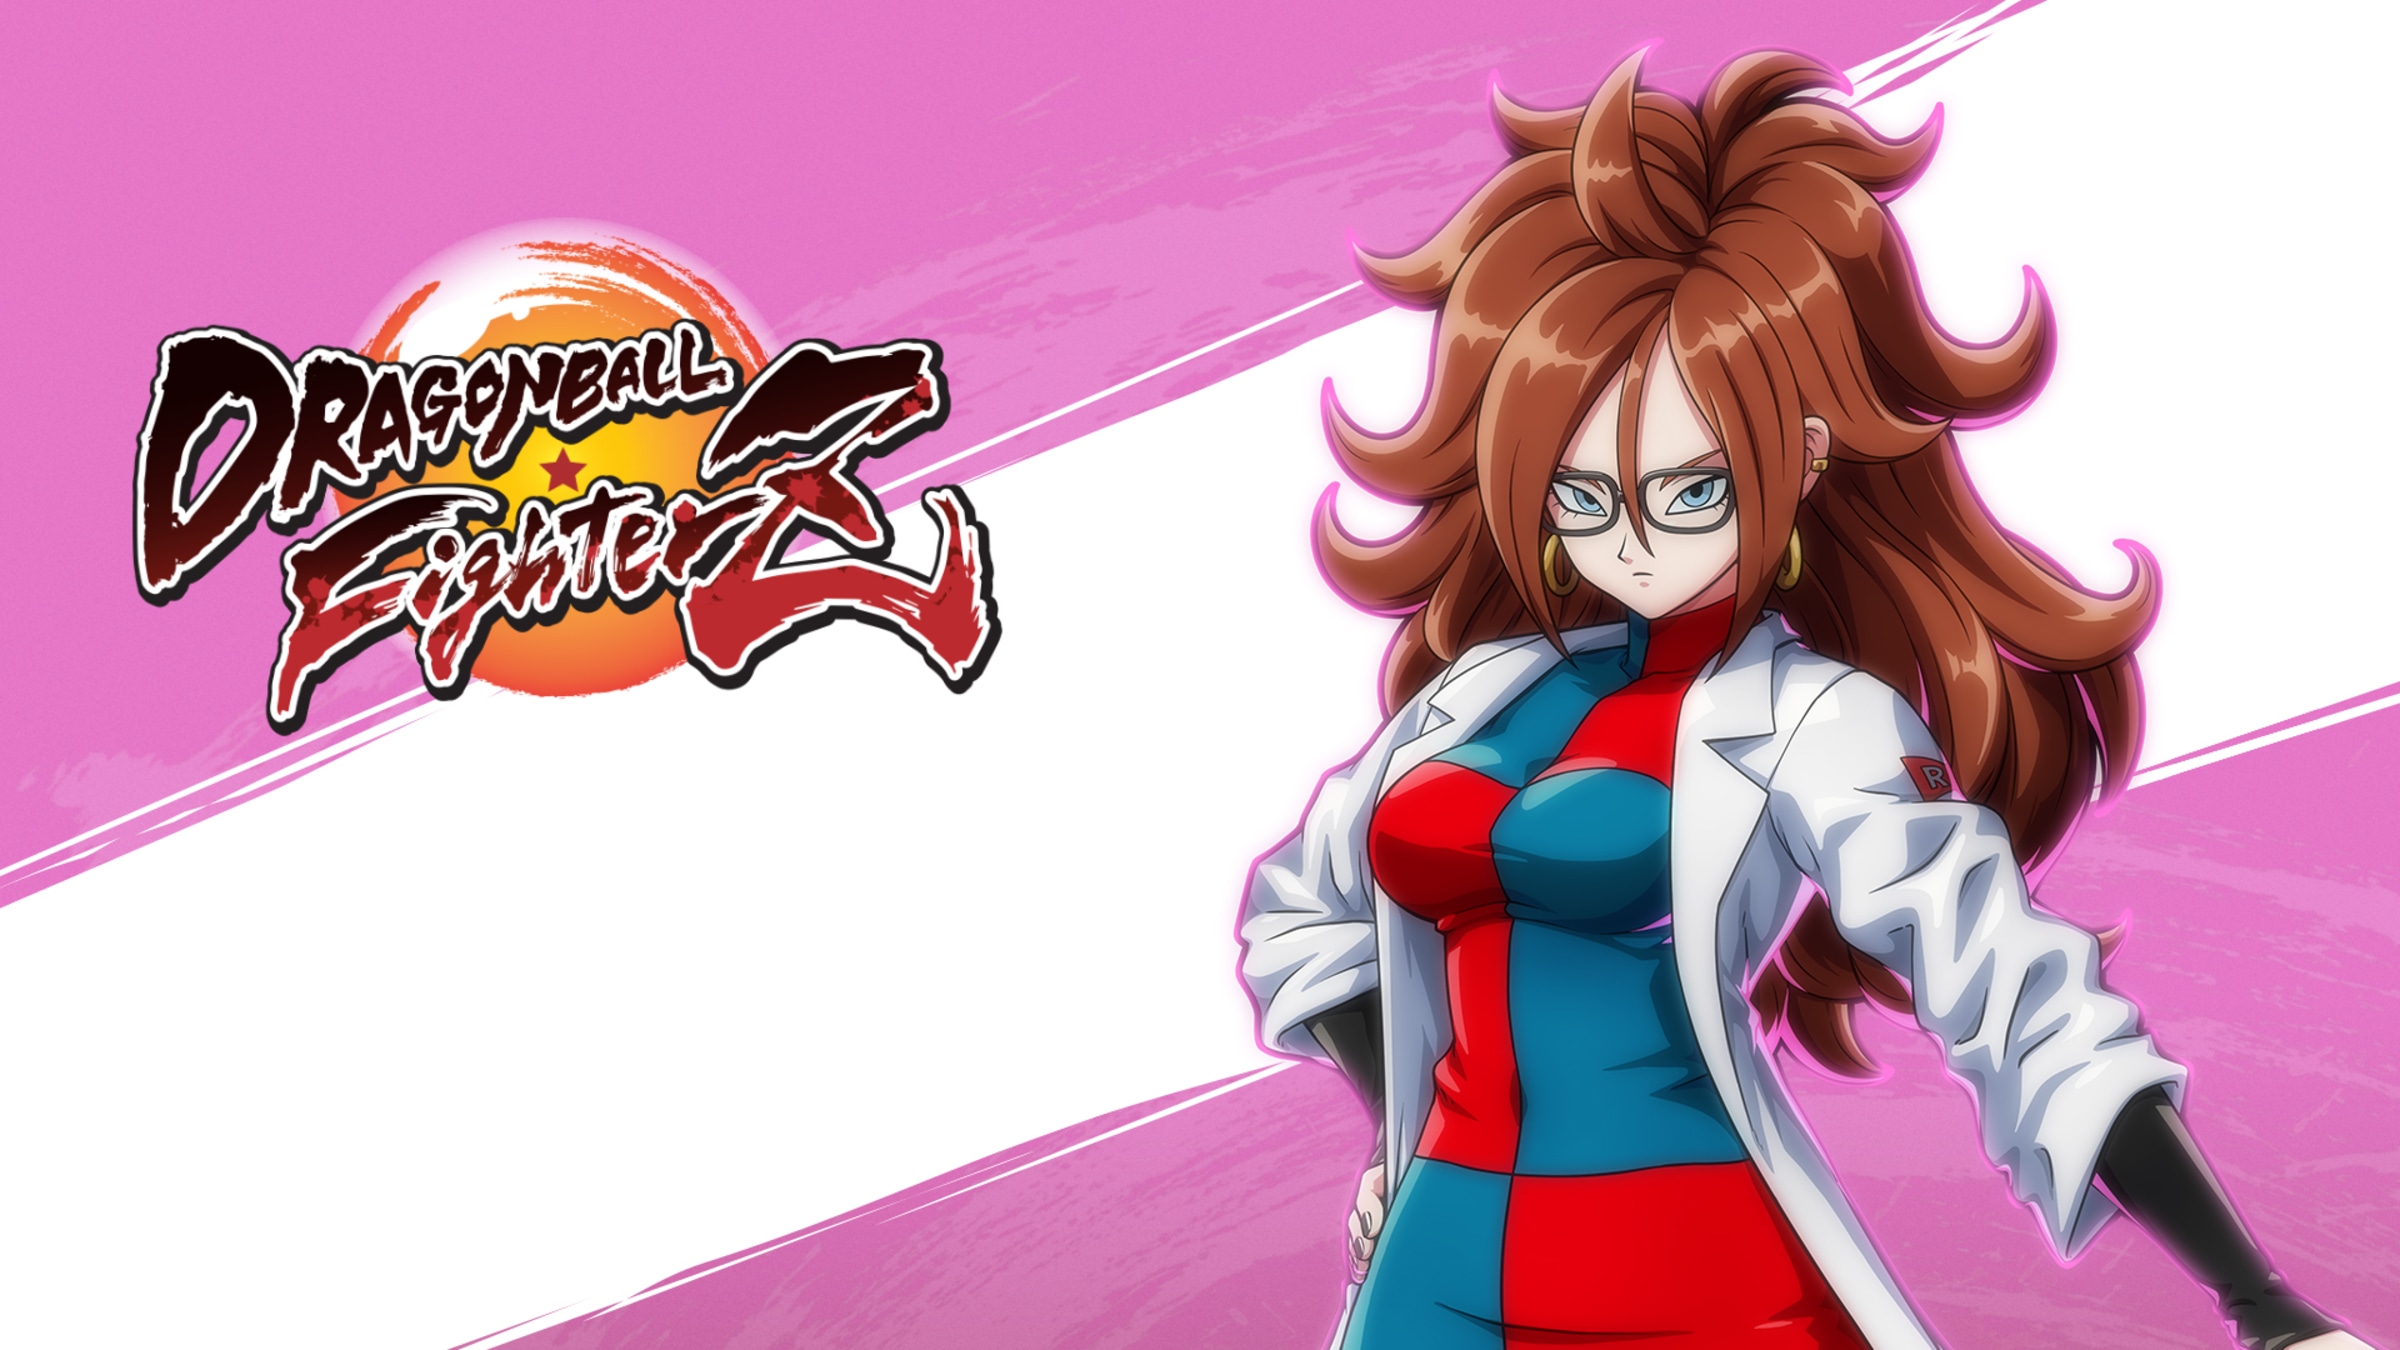 Android 21 - wide 6